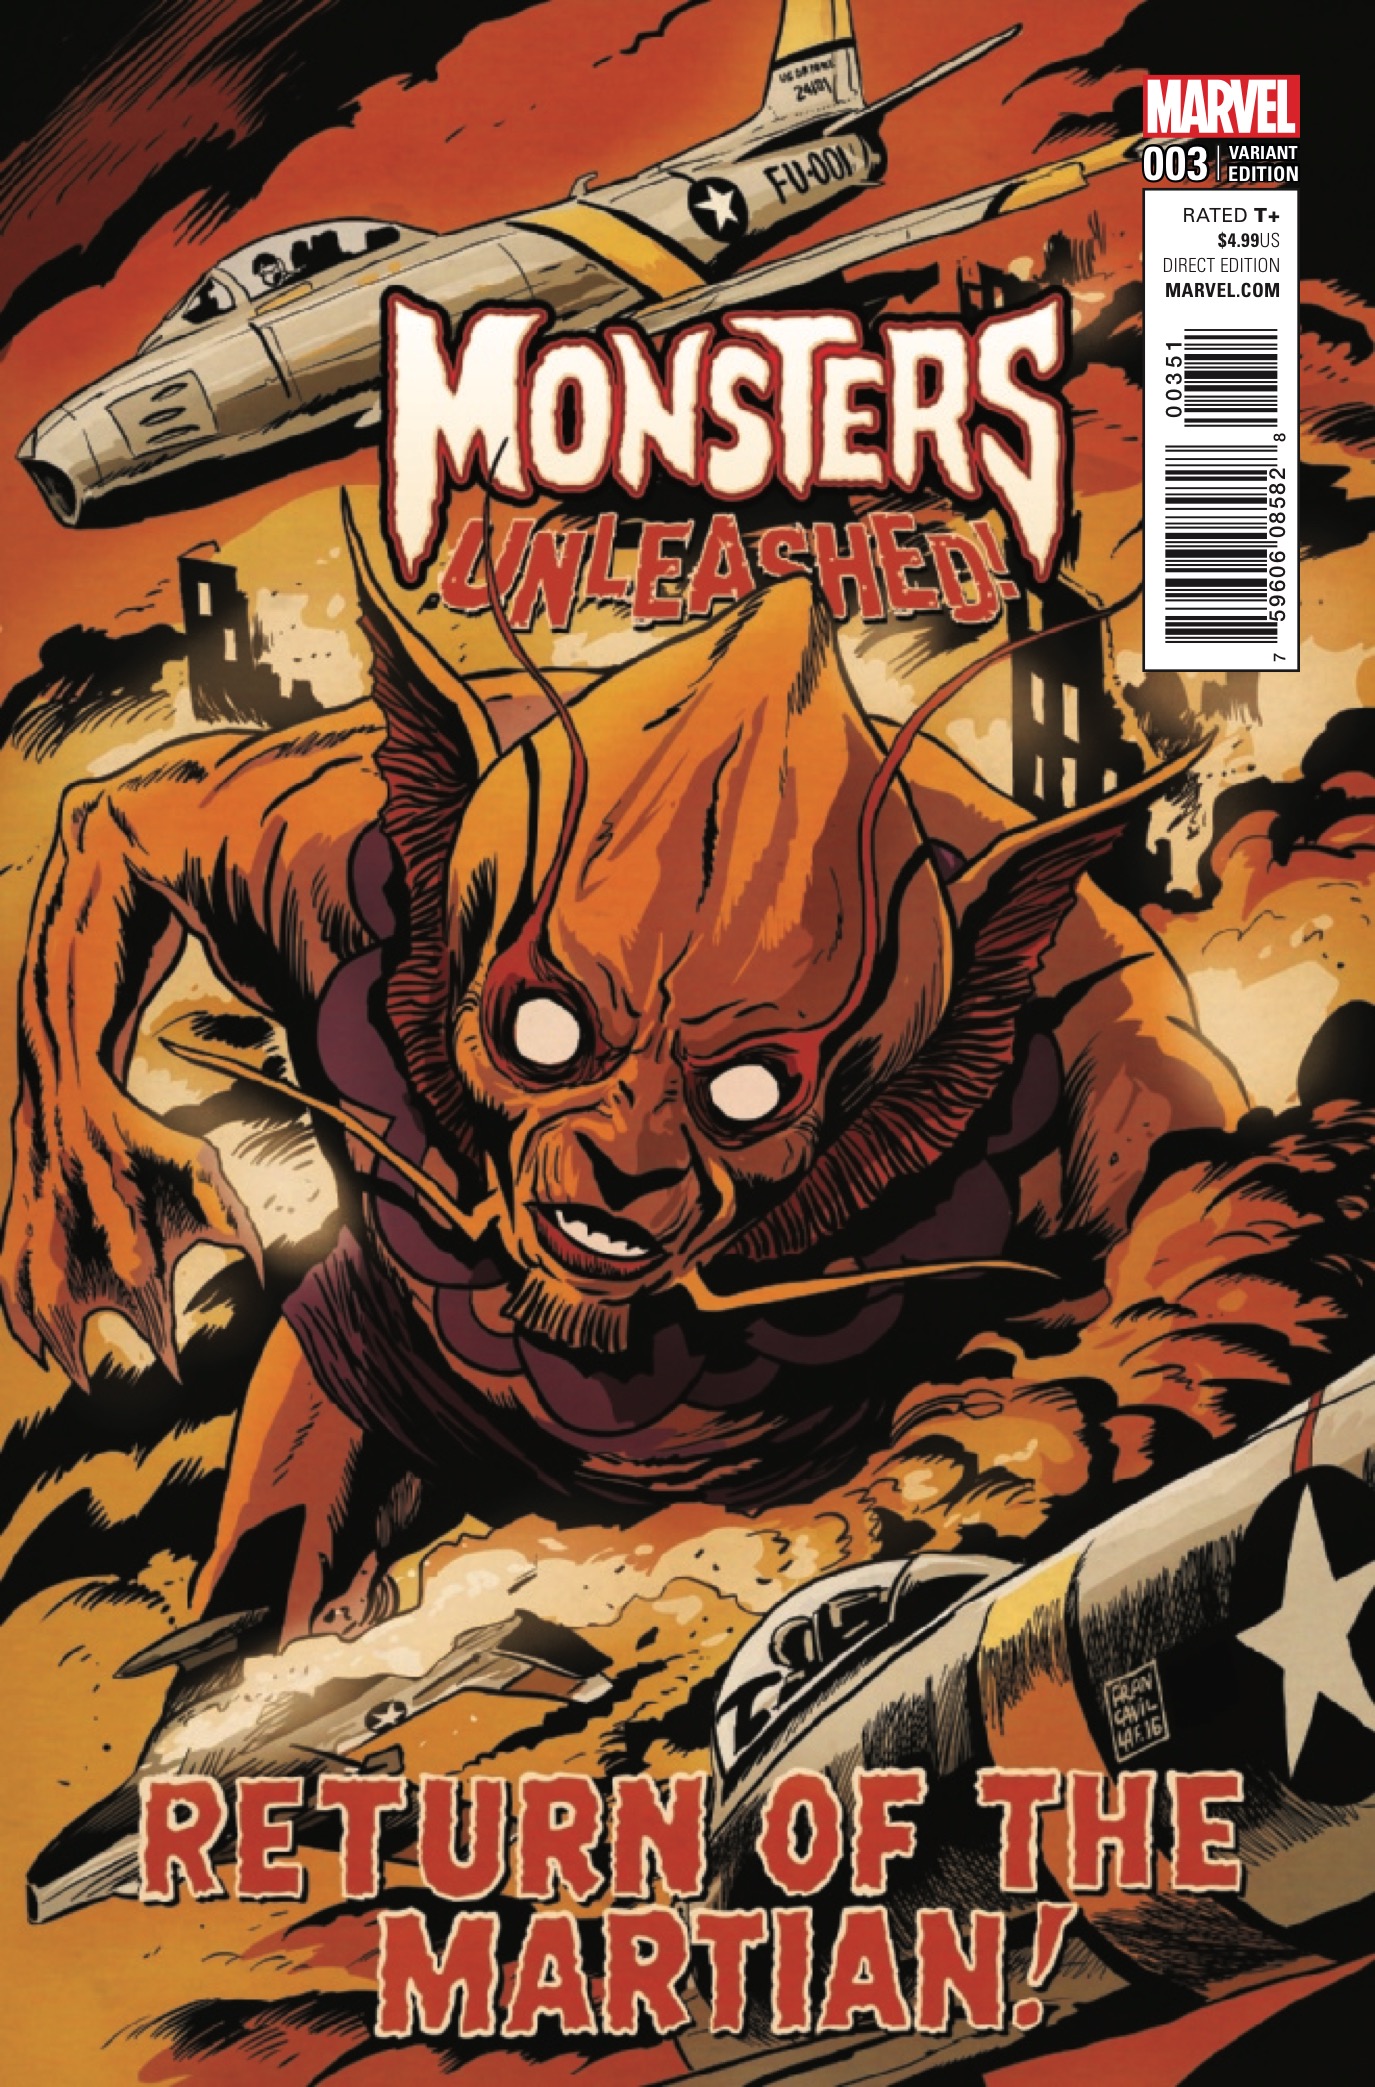 Monsters Unleashed #3 Review